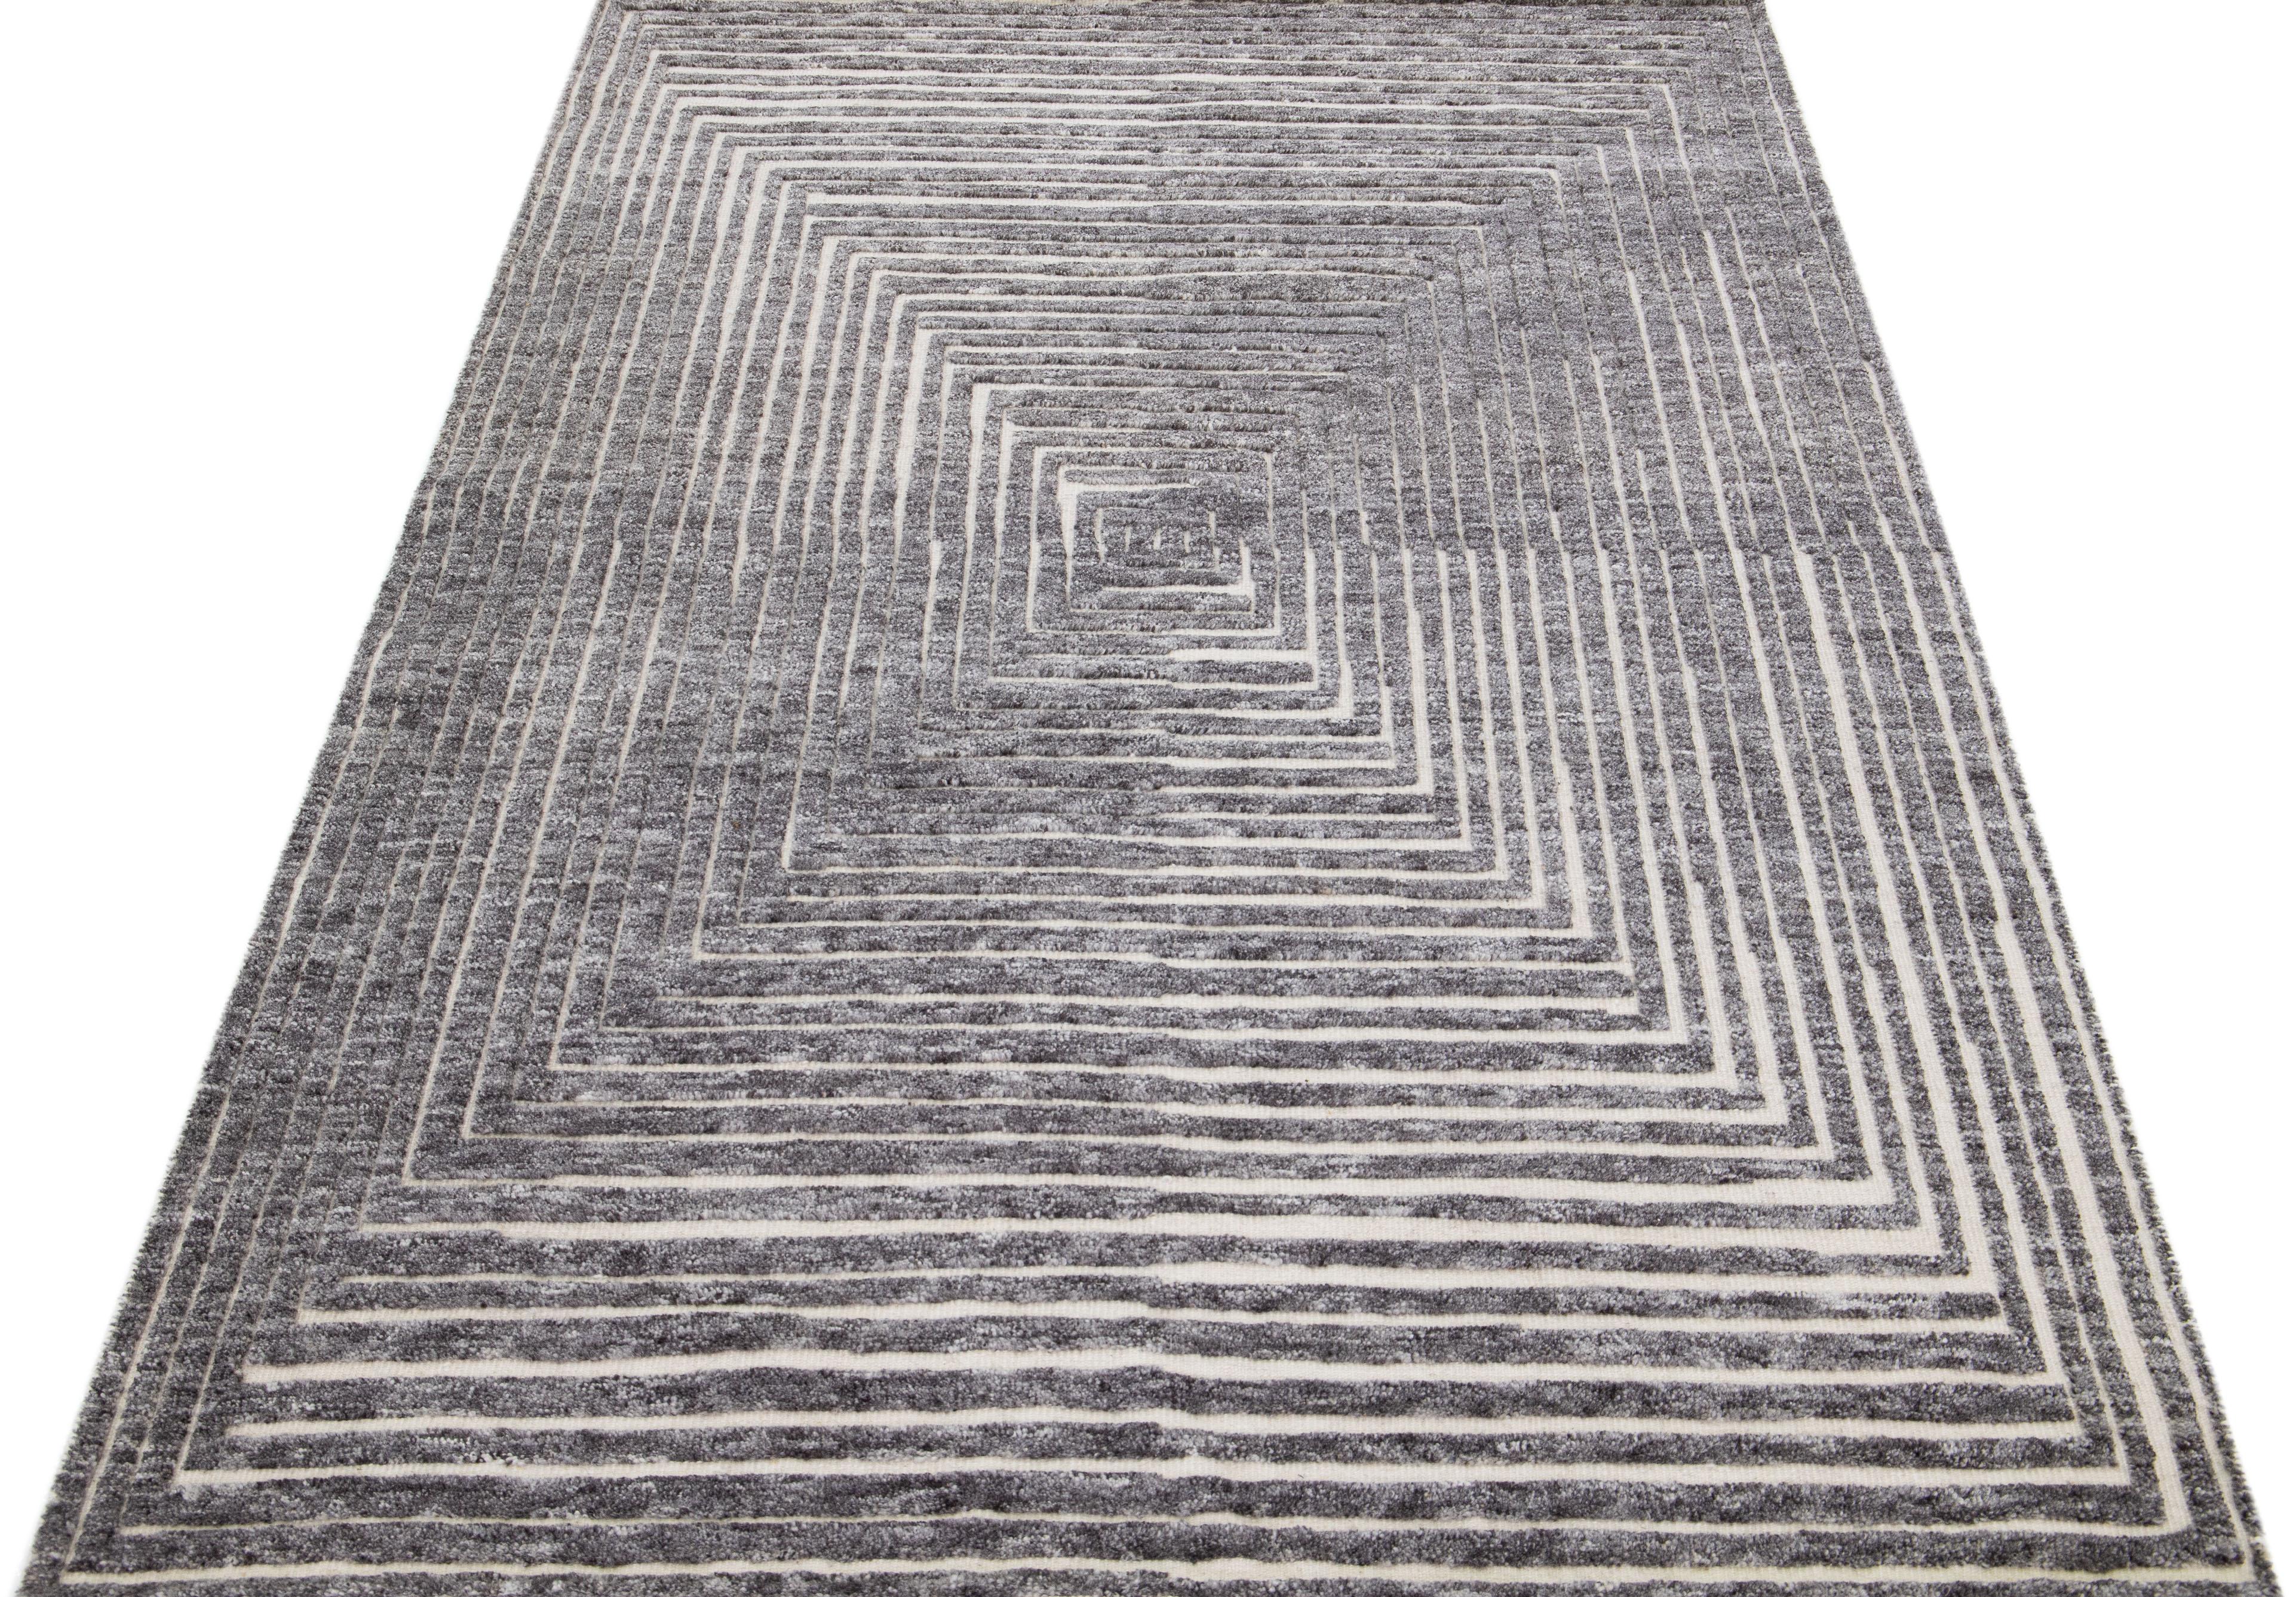 Beautiful modern Moroccan-style hand-knotted wool rug with a beige color field. This rug is part of our Apadana's Safi Collection and features an Op Art squares seamless design in gray.

This rug measures: 5'1